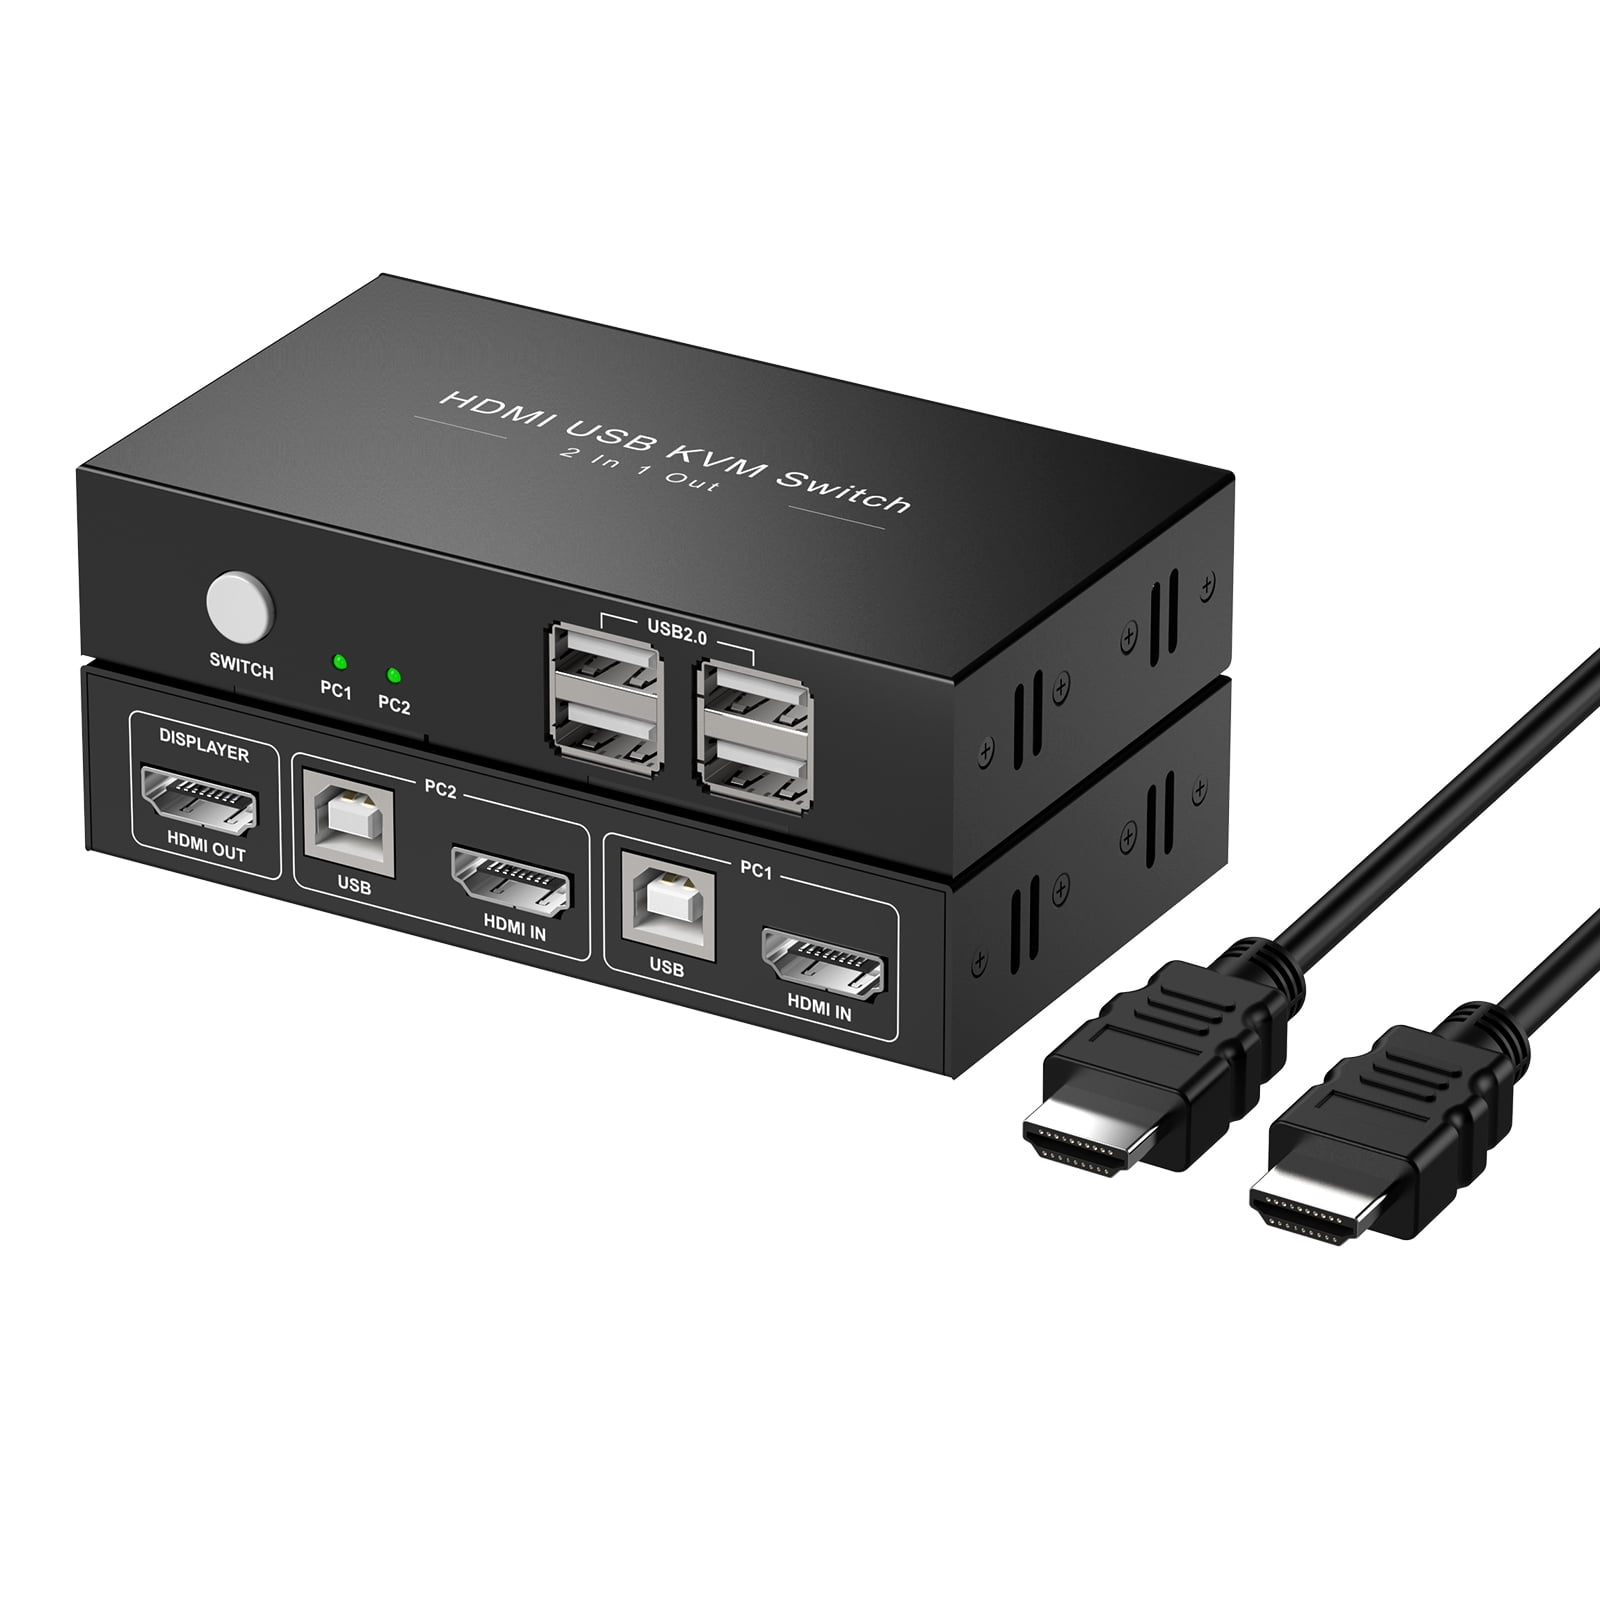 KVM Switch HDMI 2 Port Box,USB and HDMI Switch for 2 Computers Share Keyboard Mouse Printer Monitor Support HUD 4K@30Hz for Laptop,PC,Xbox HDTV with 2X USB Cable,1x Switch Button Cable